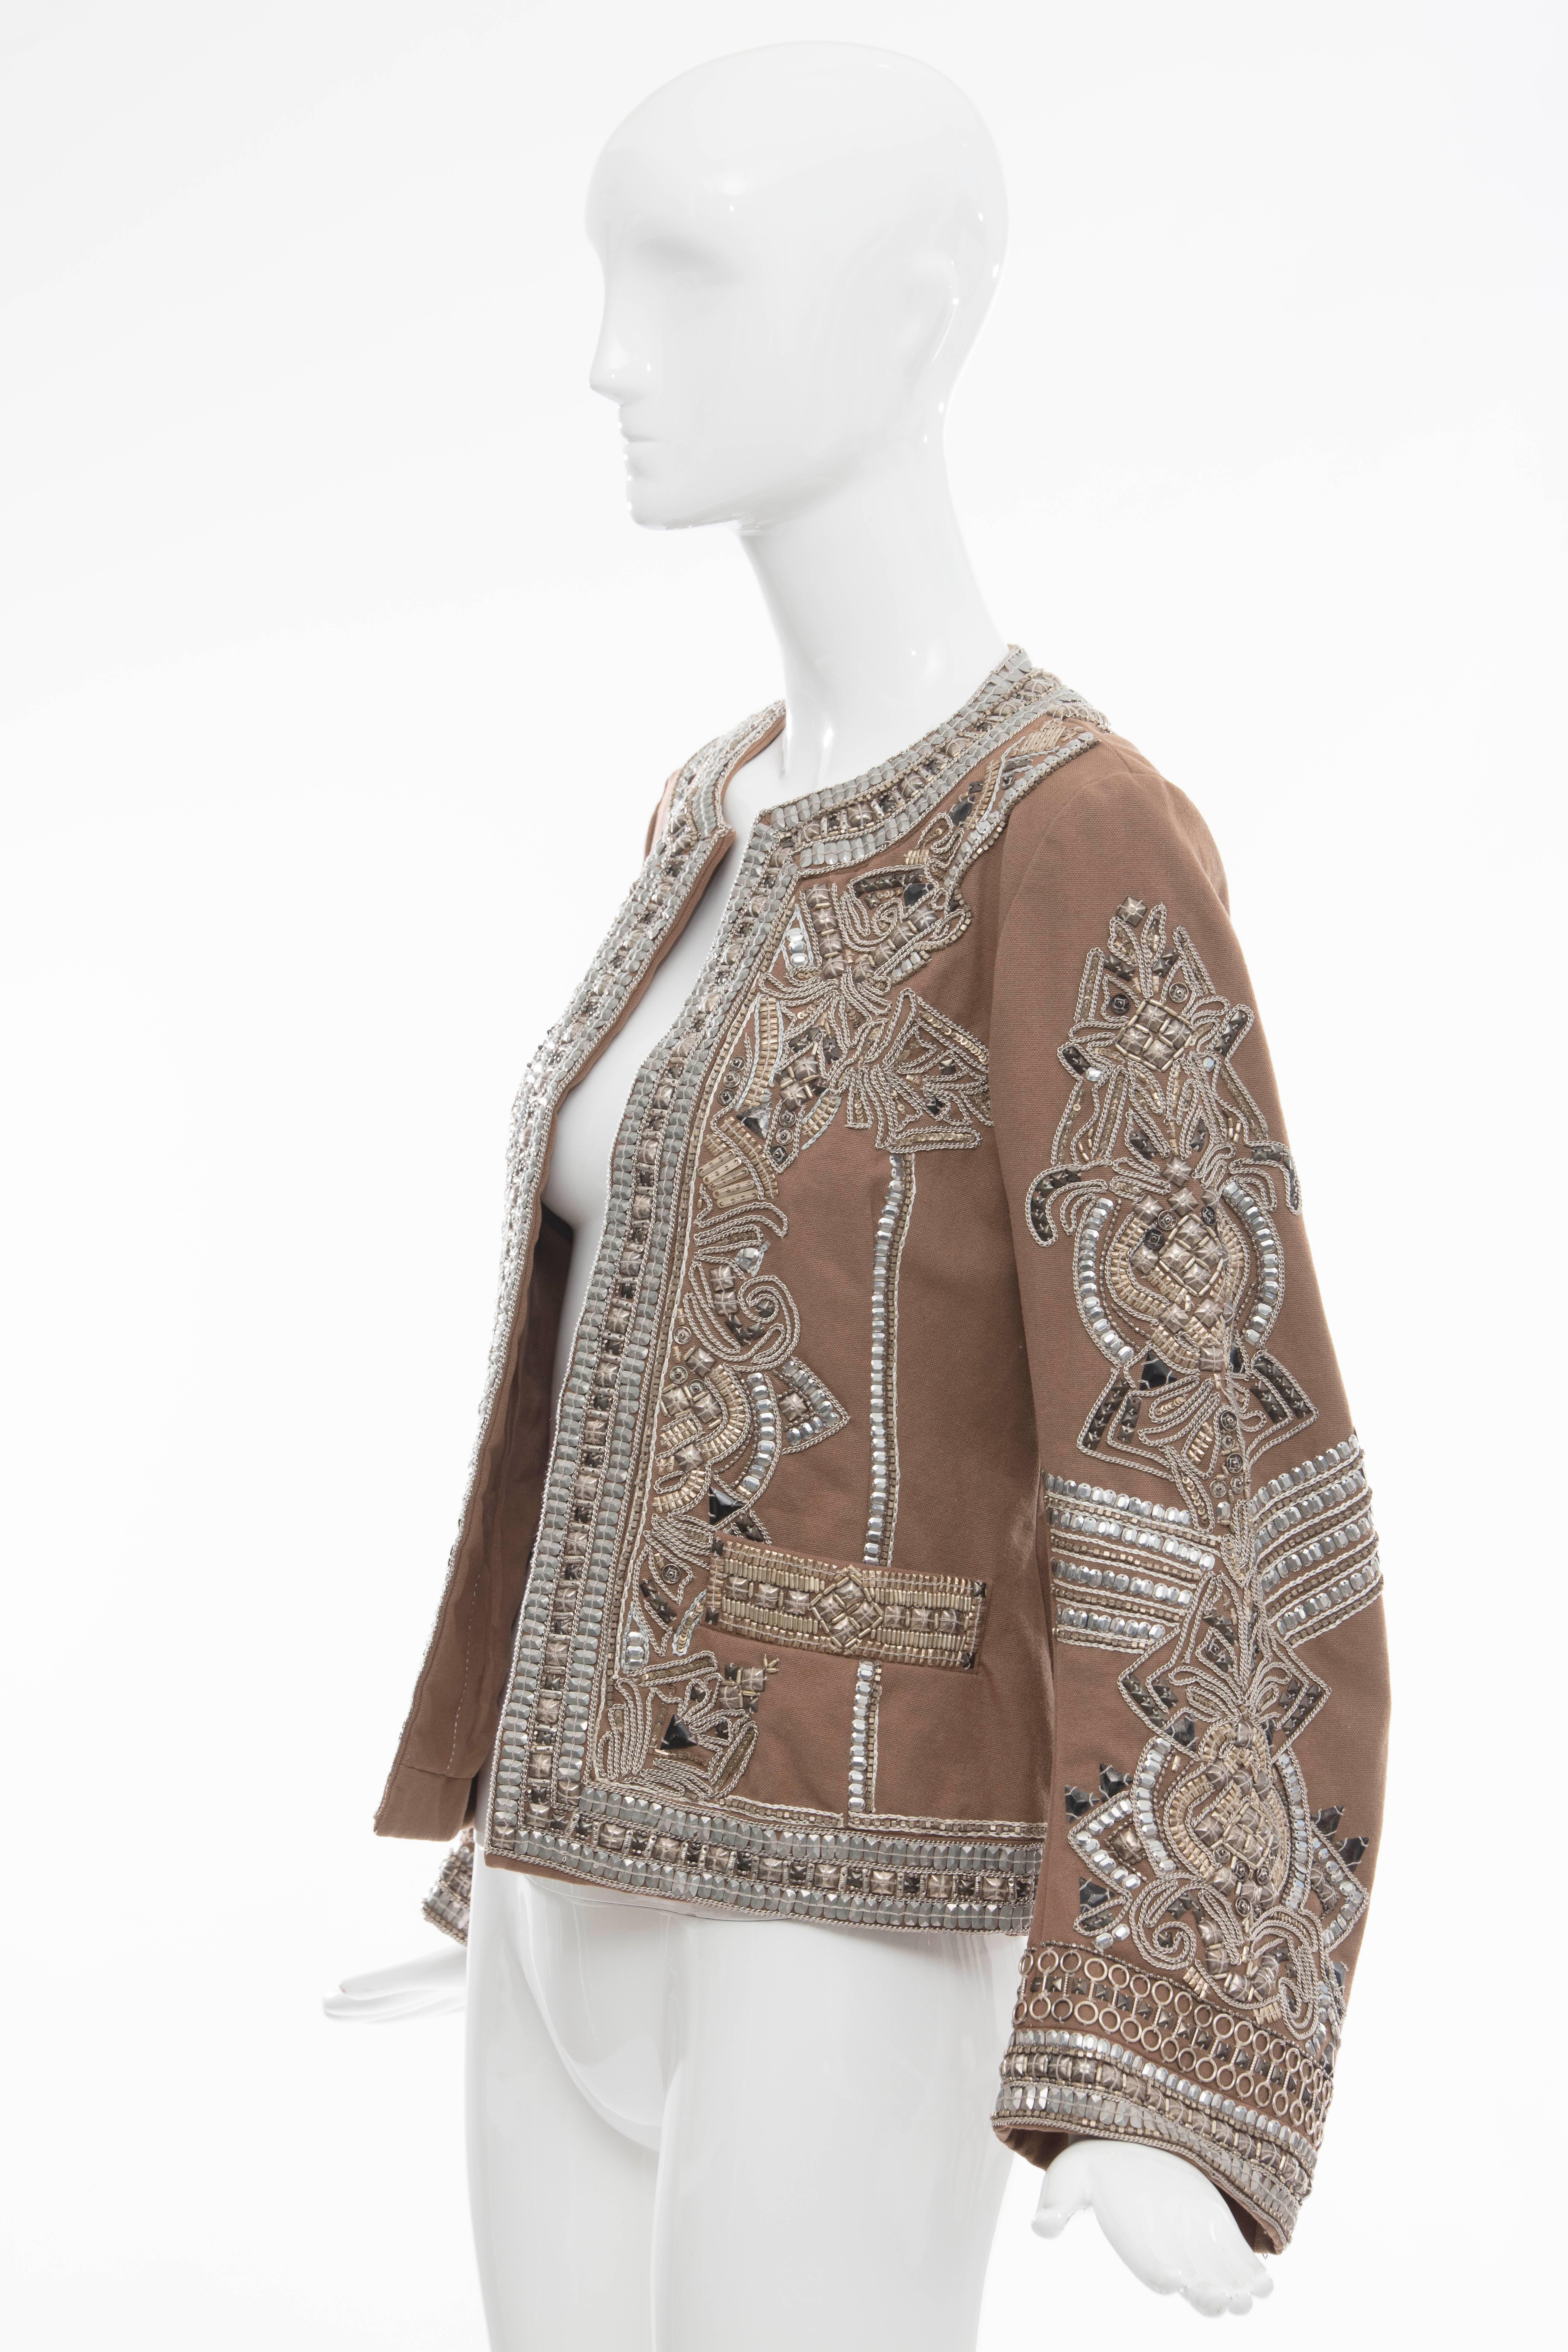 Dries Van Noten Cotton Embroidered Jacket With Silver Indian Thread, Fall 2010 For Sale 2